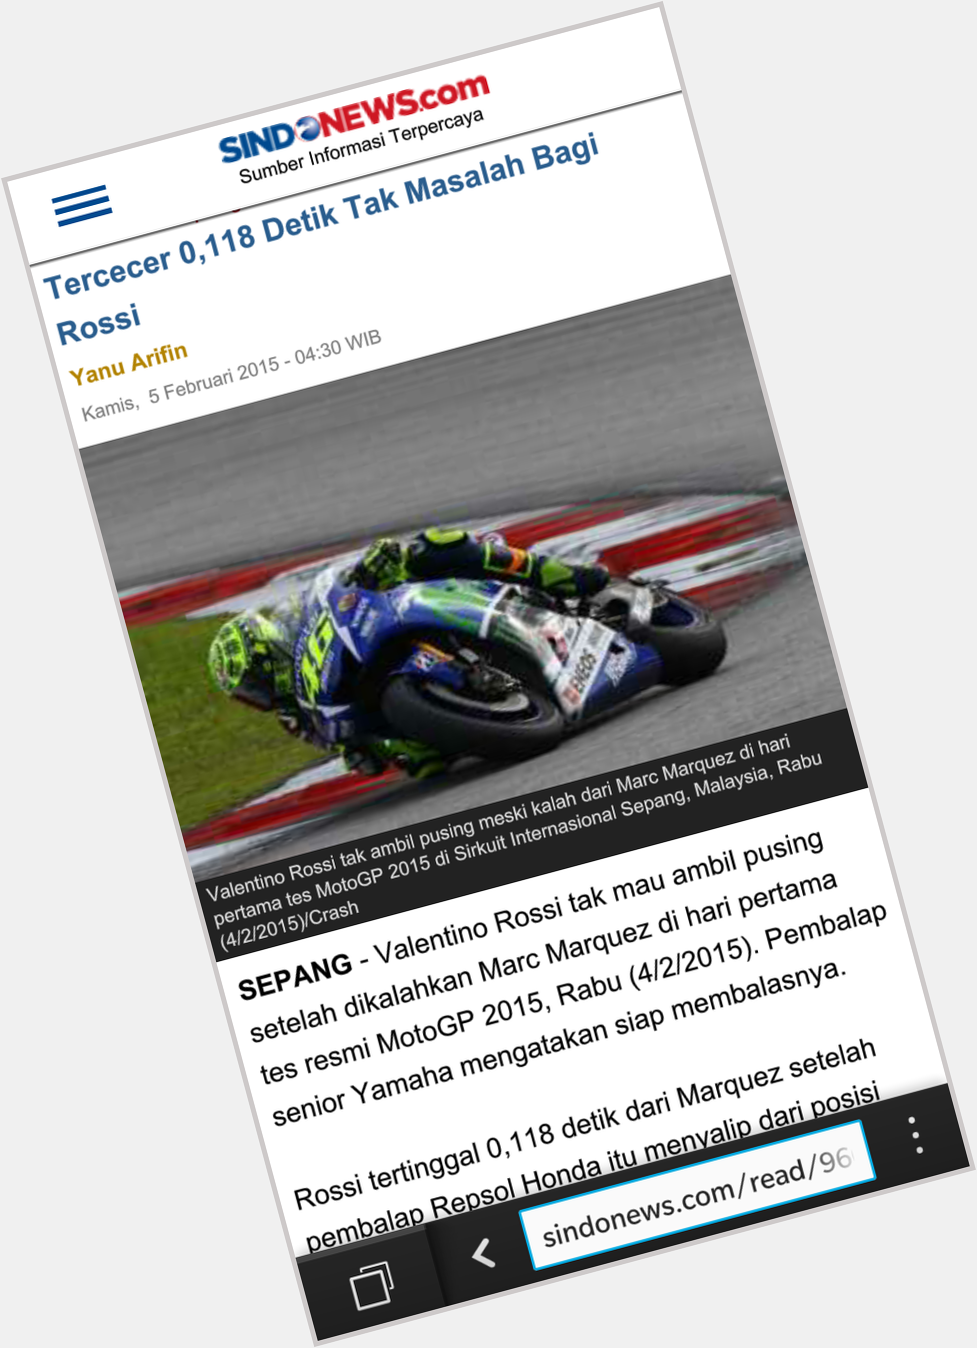 Happy birthday valentino rossi. hopefully your world championship title that to 10 in MotoGP 2015 